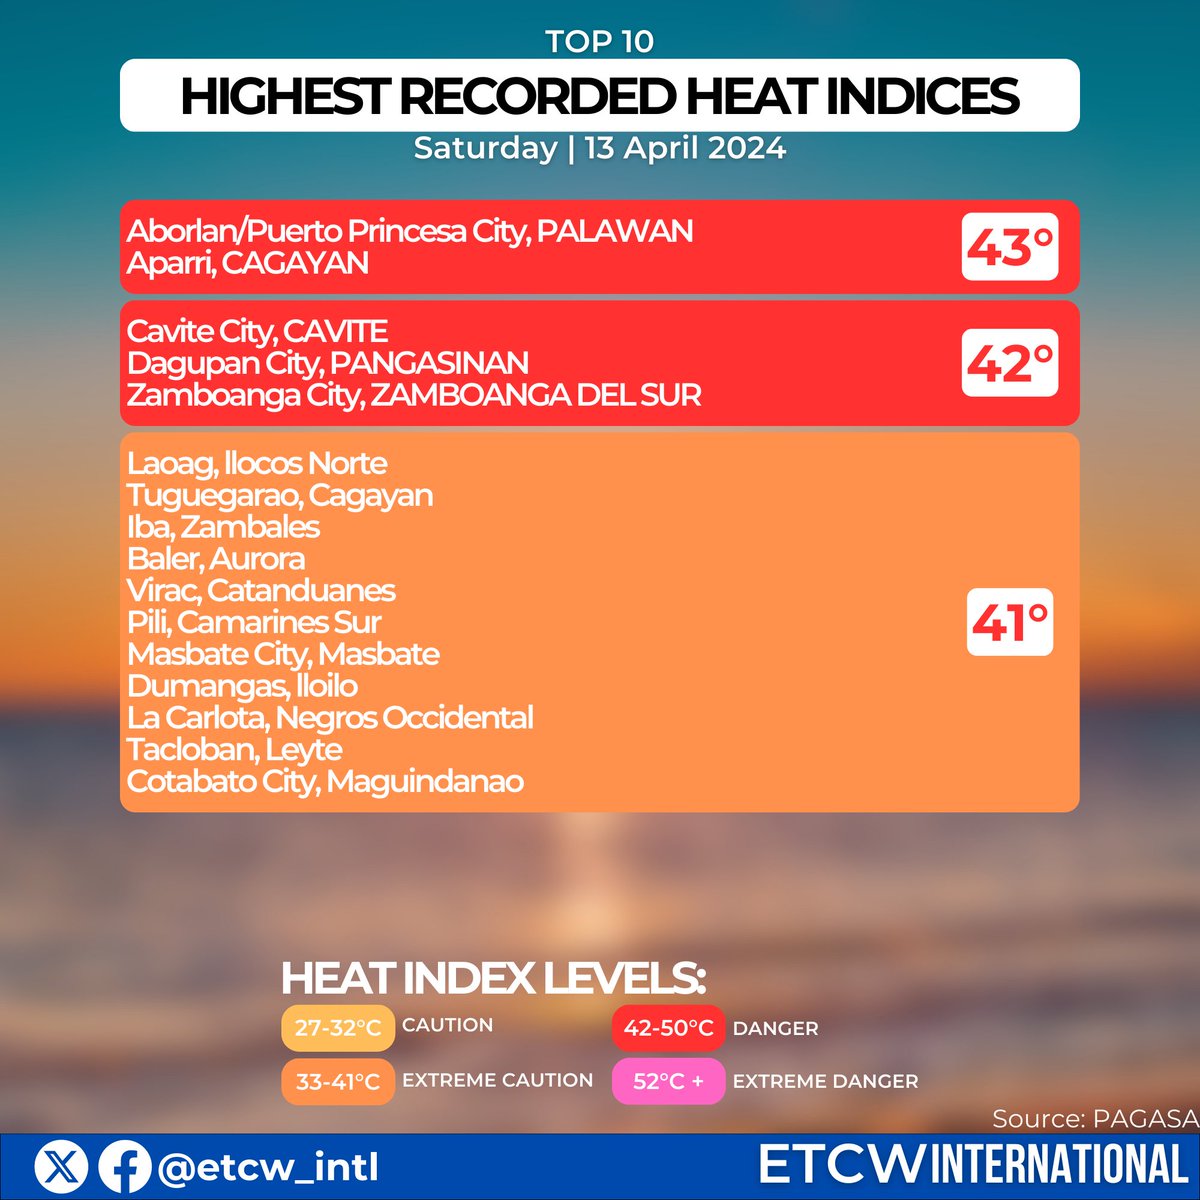 HIGHEST RECORDED HEAT INDICES
(Saturday | 13 April 2024 ) 

6 towns recorded a 'Danger' level heat index today, with Aborlan and Puerto Princesa in Palawan leading the way, and Aparri in Cagayan which recorded a heat index of 43° C.